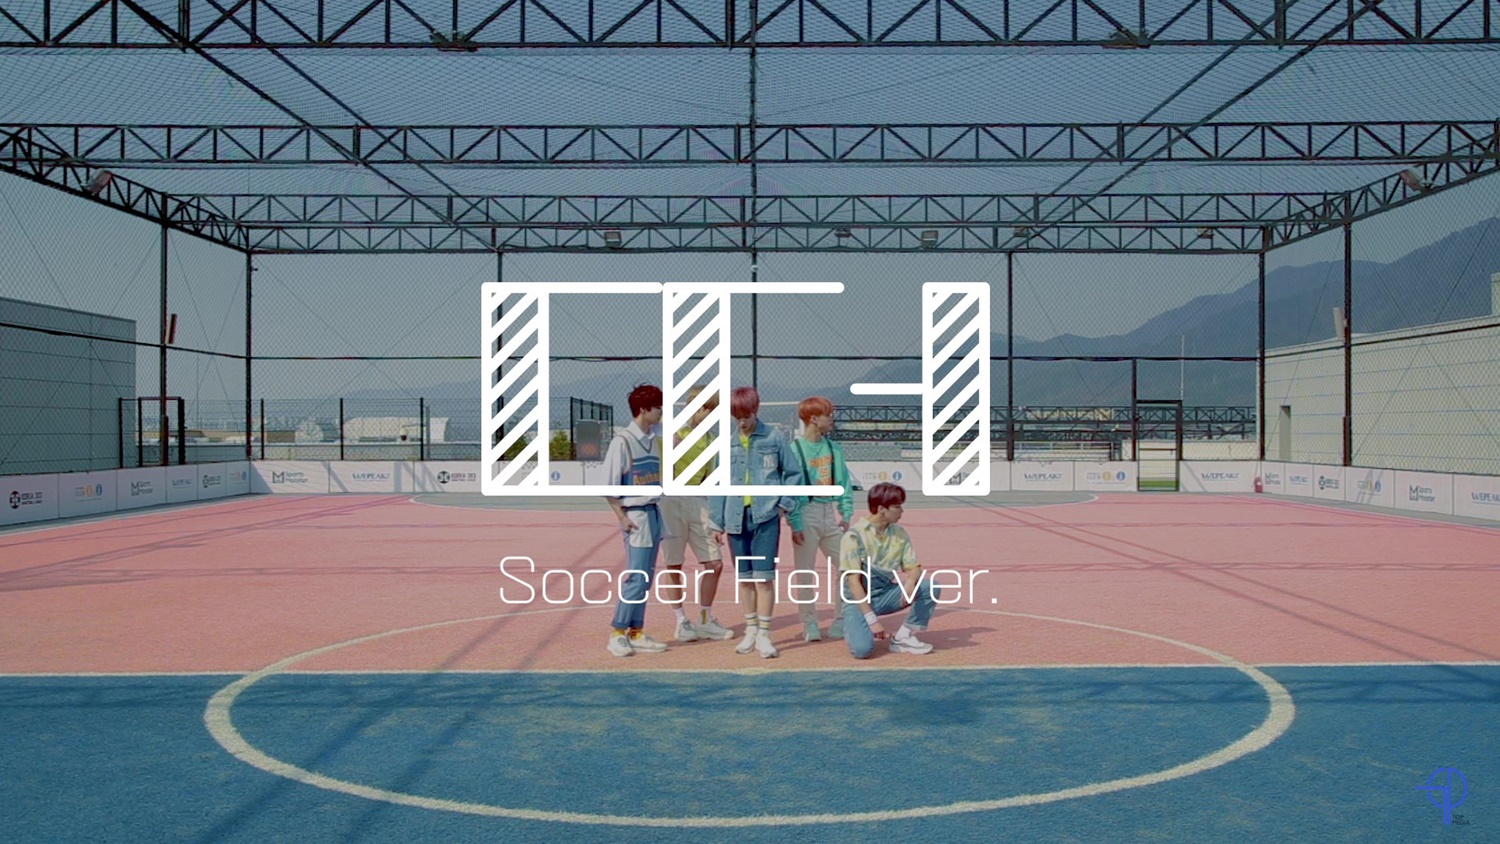 [Let's Play MCND] #MCND '떠(Spring)' 안무영상 (Soccer Field ver.)ㅣSpecial Video